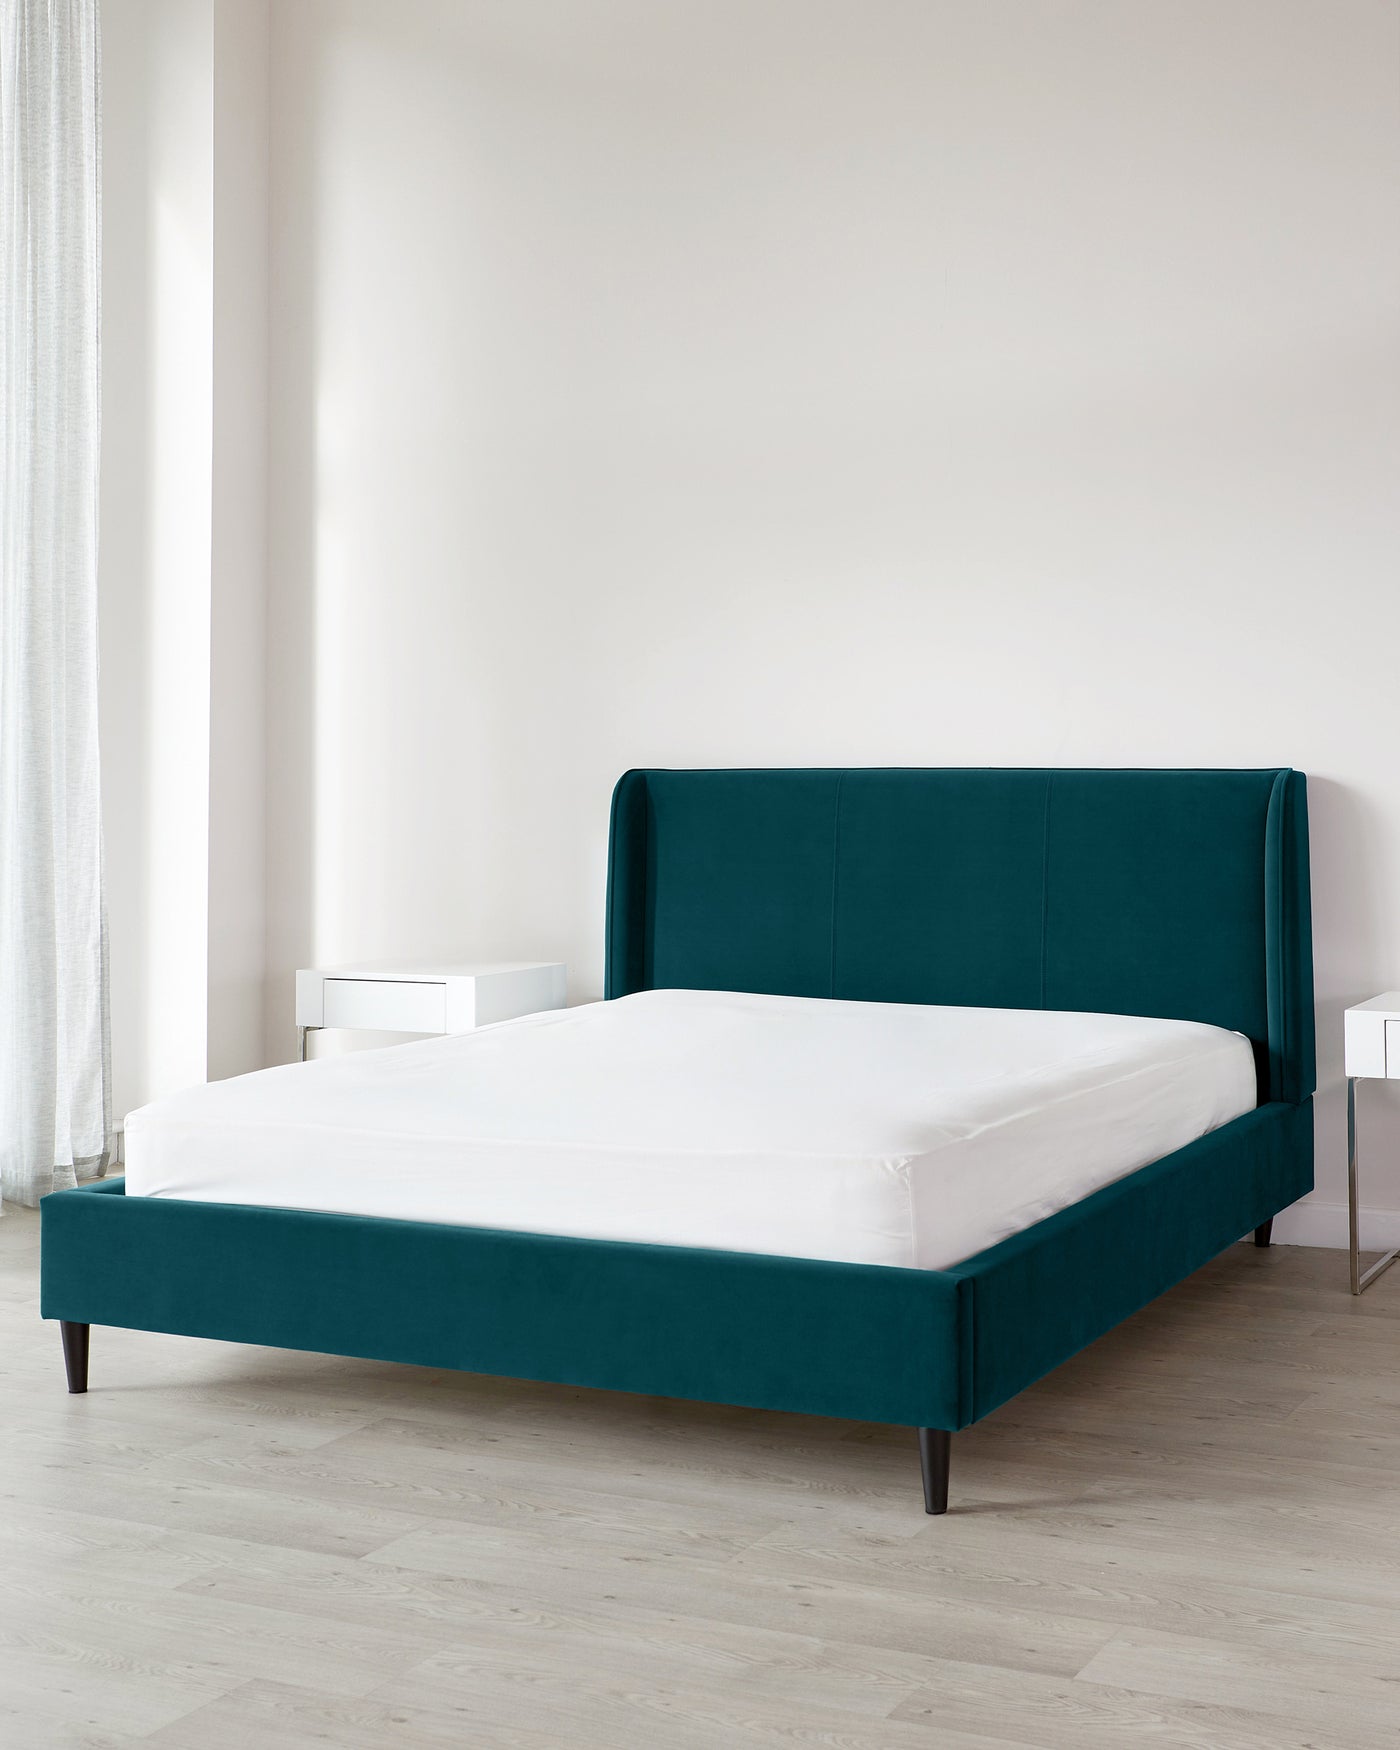 A contemporary teal upholstered queen bed with a high headboard and dark wooden legs, flanked by two minimalist white nightstands on a light hardwood floor.